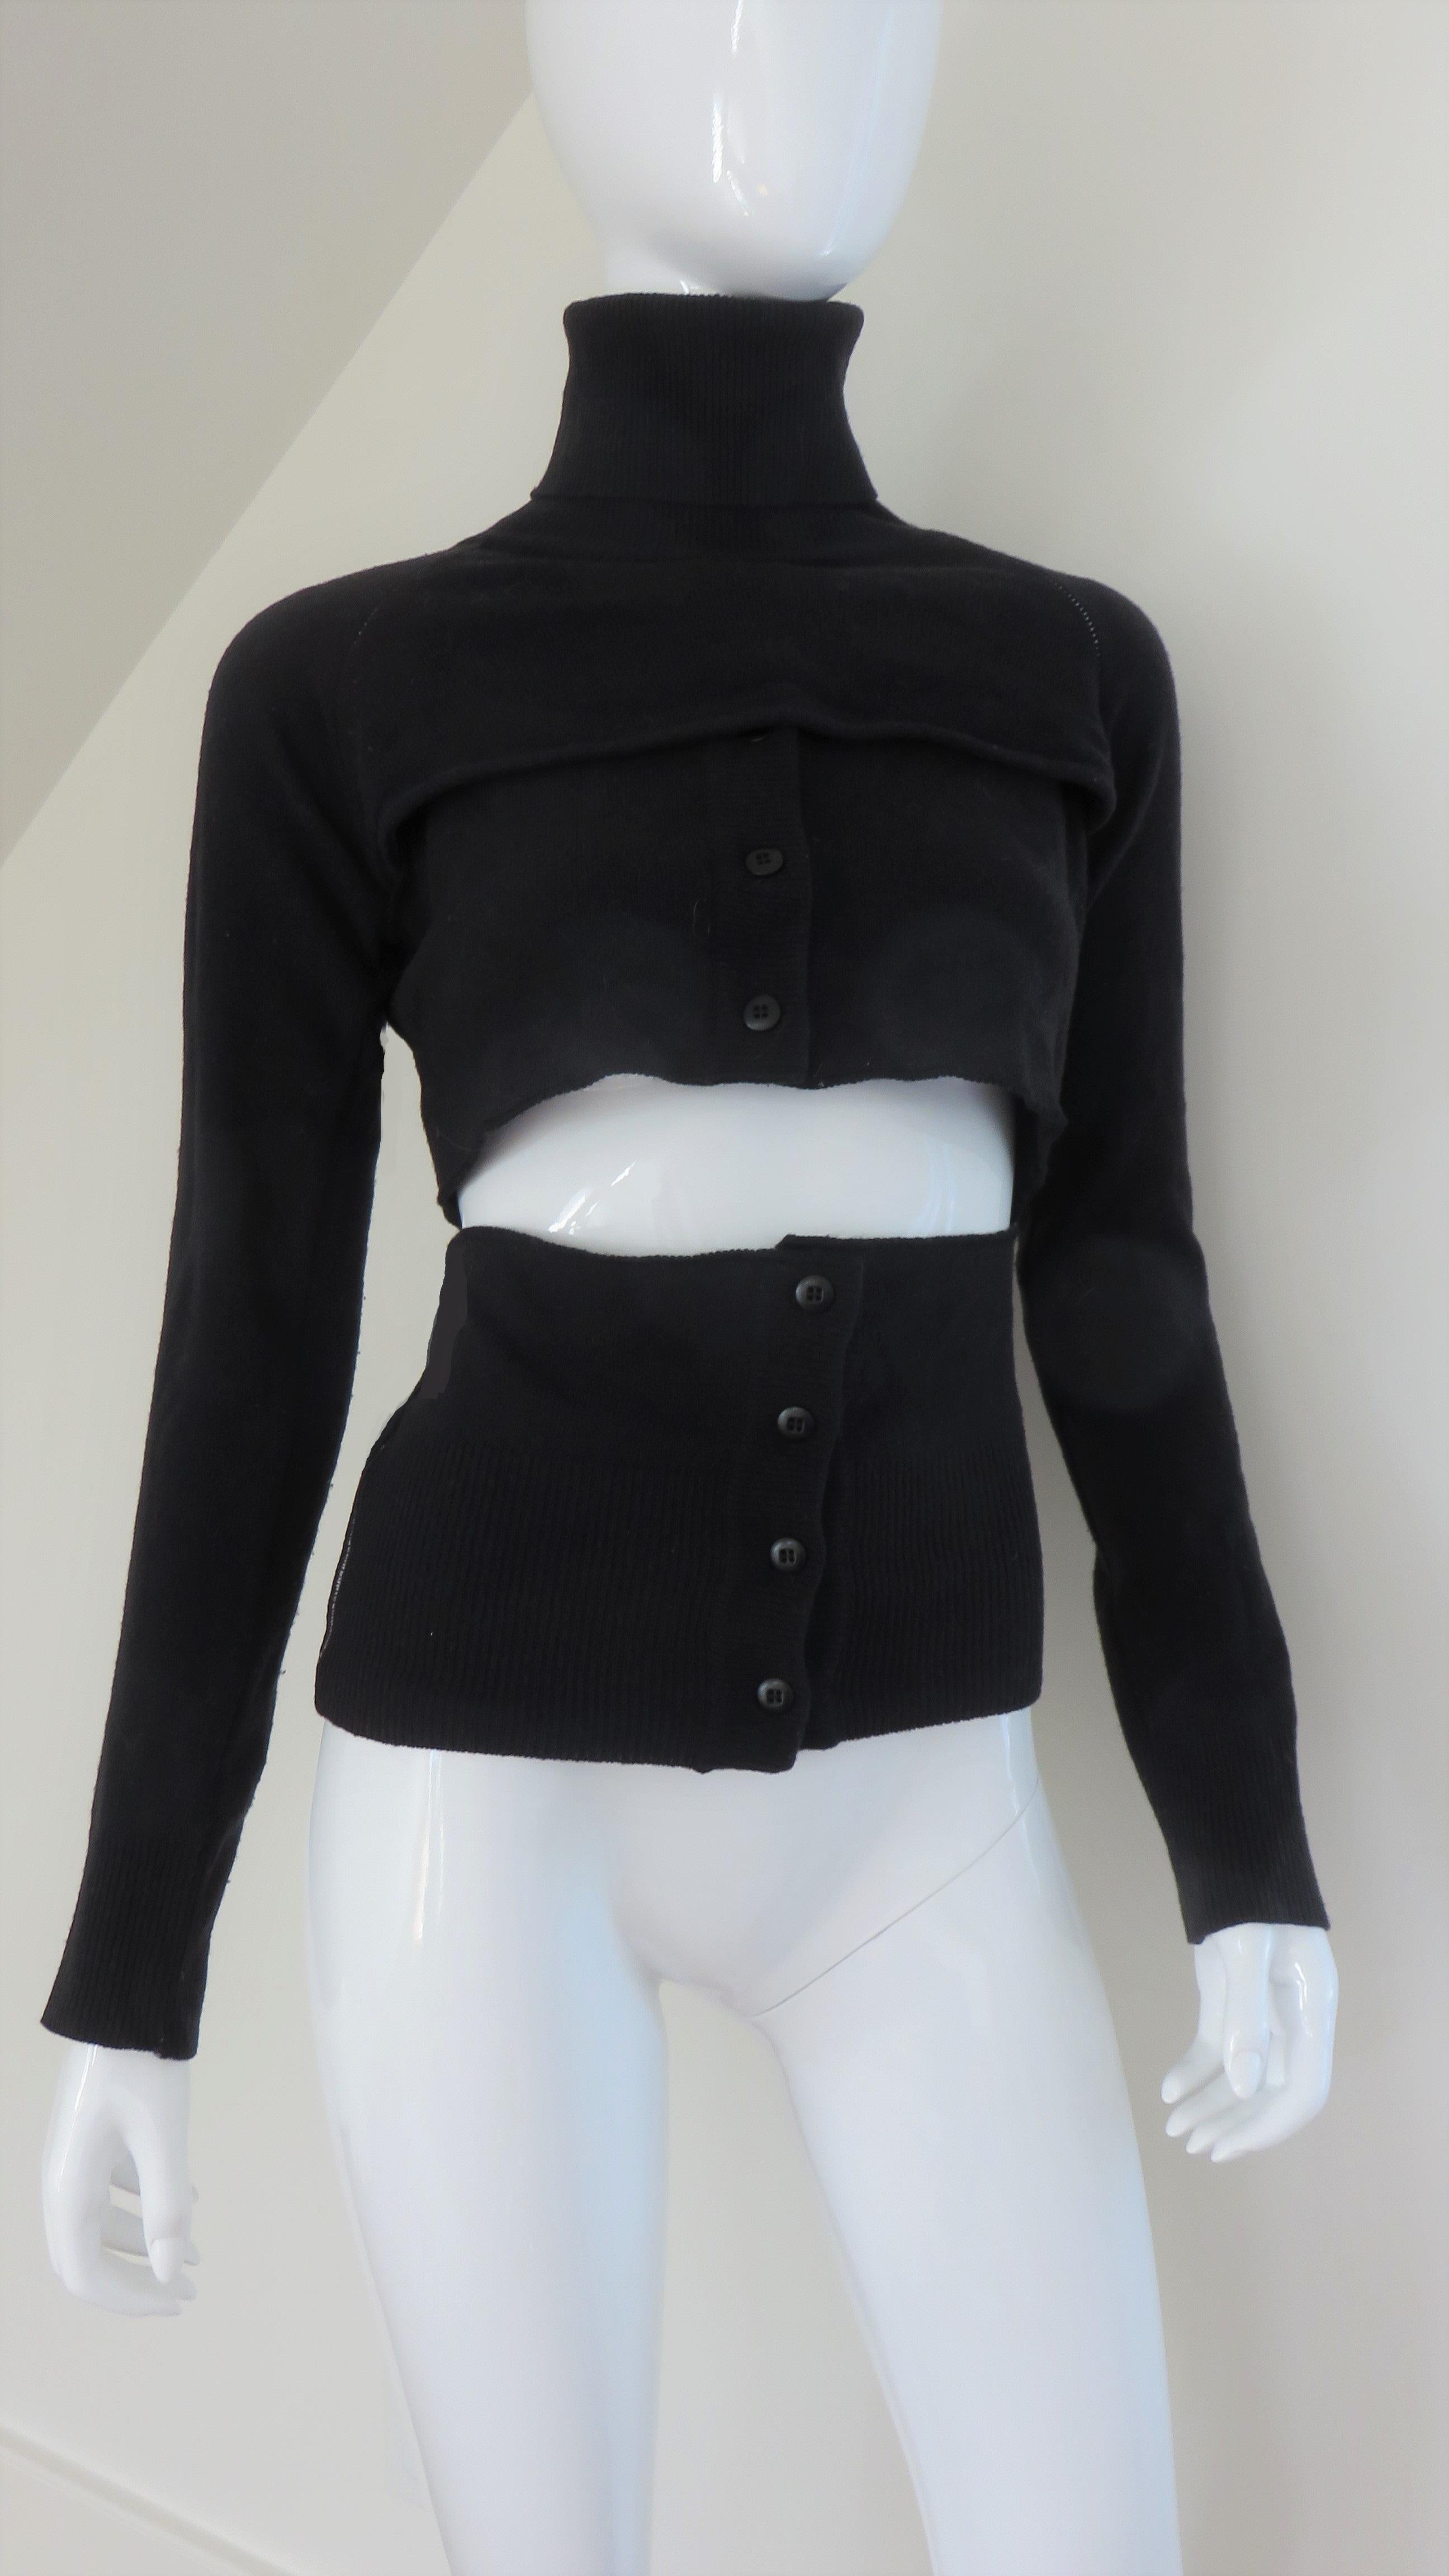 A fabulous black wool knit 4 piece sweater set from Martin Margiela. It consists of a crop long sleeve turtleneck, a long sleeve shrug, a crop sleeveless vest and a wide hip band.  All can be configured in different ways or worn separately.  
Marked